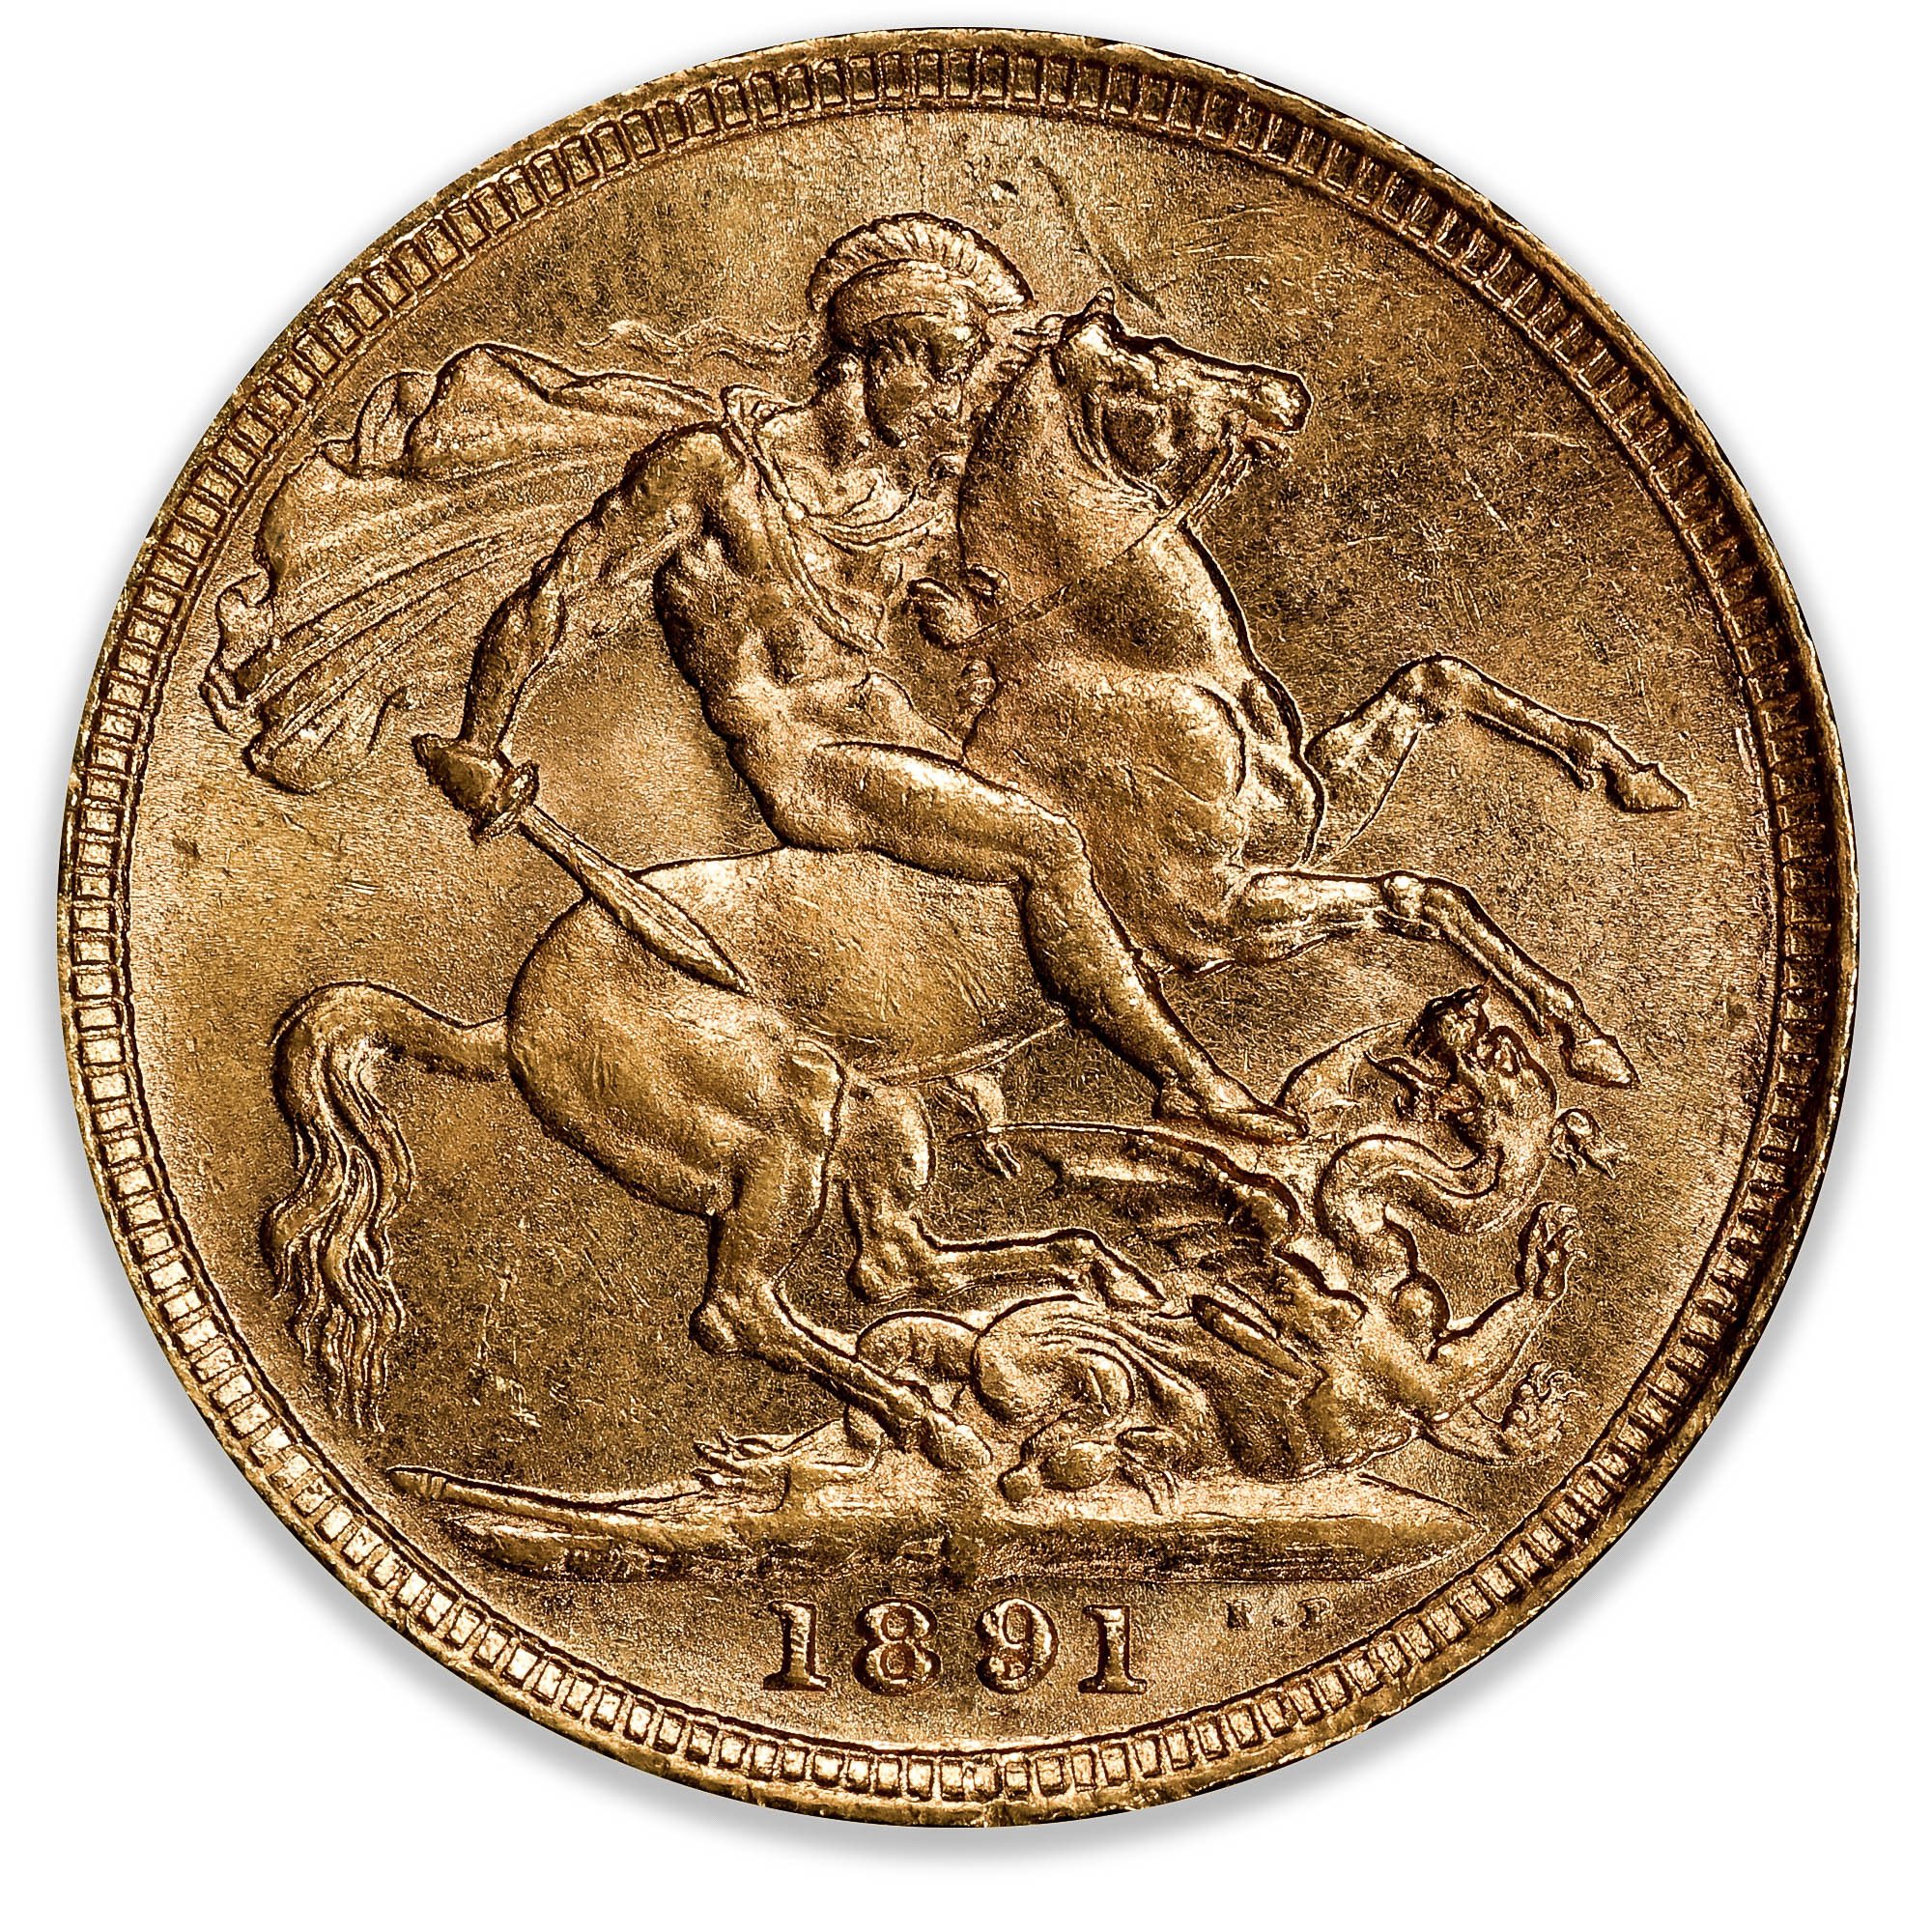 1891S Jubilee Head Sovereign PCGS MS62